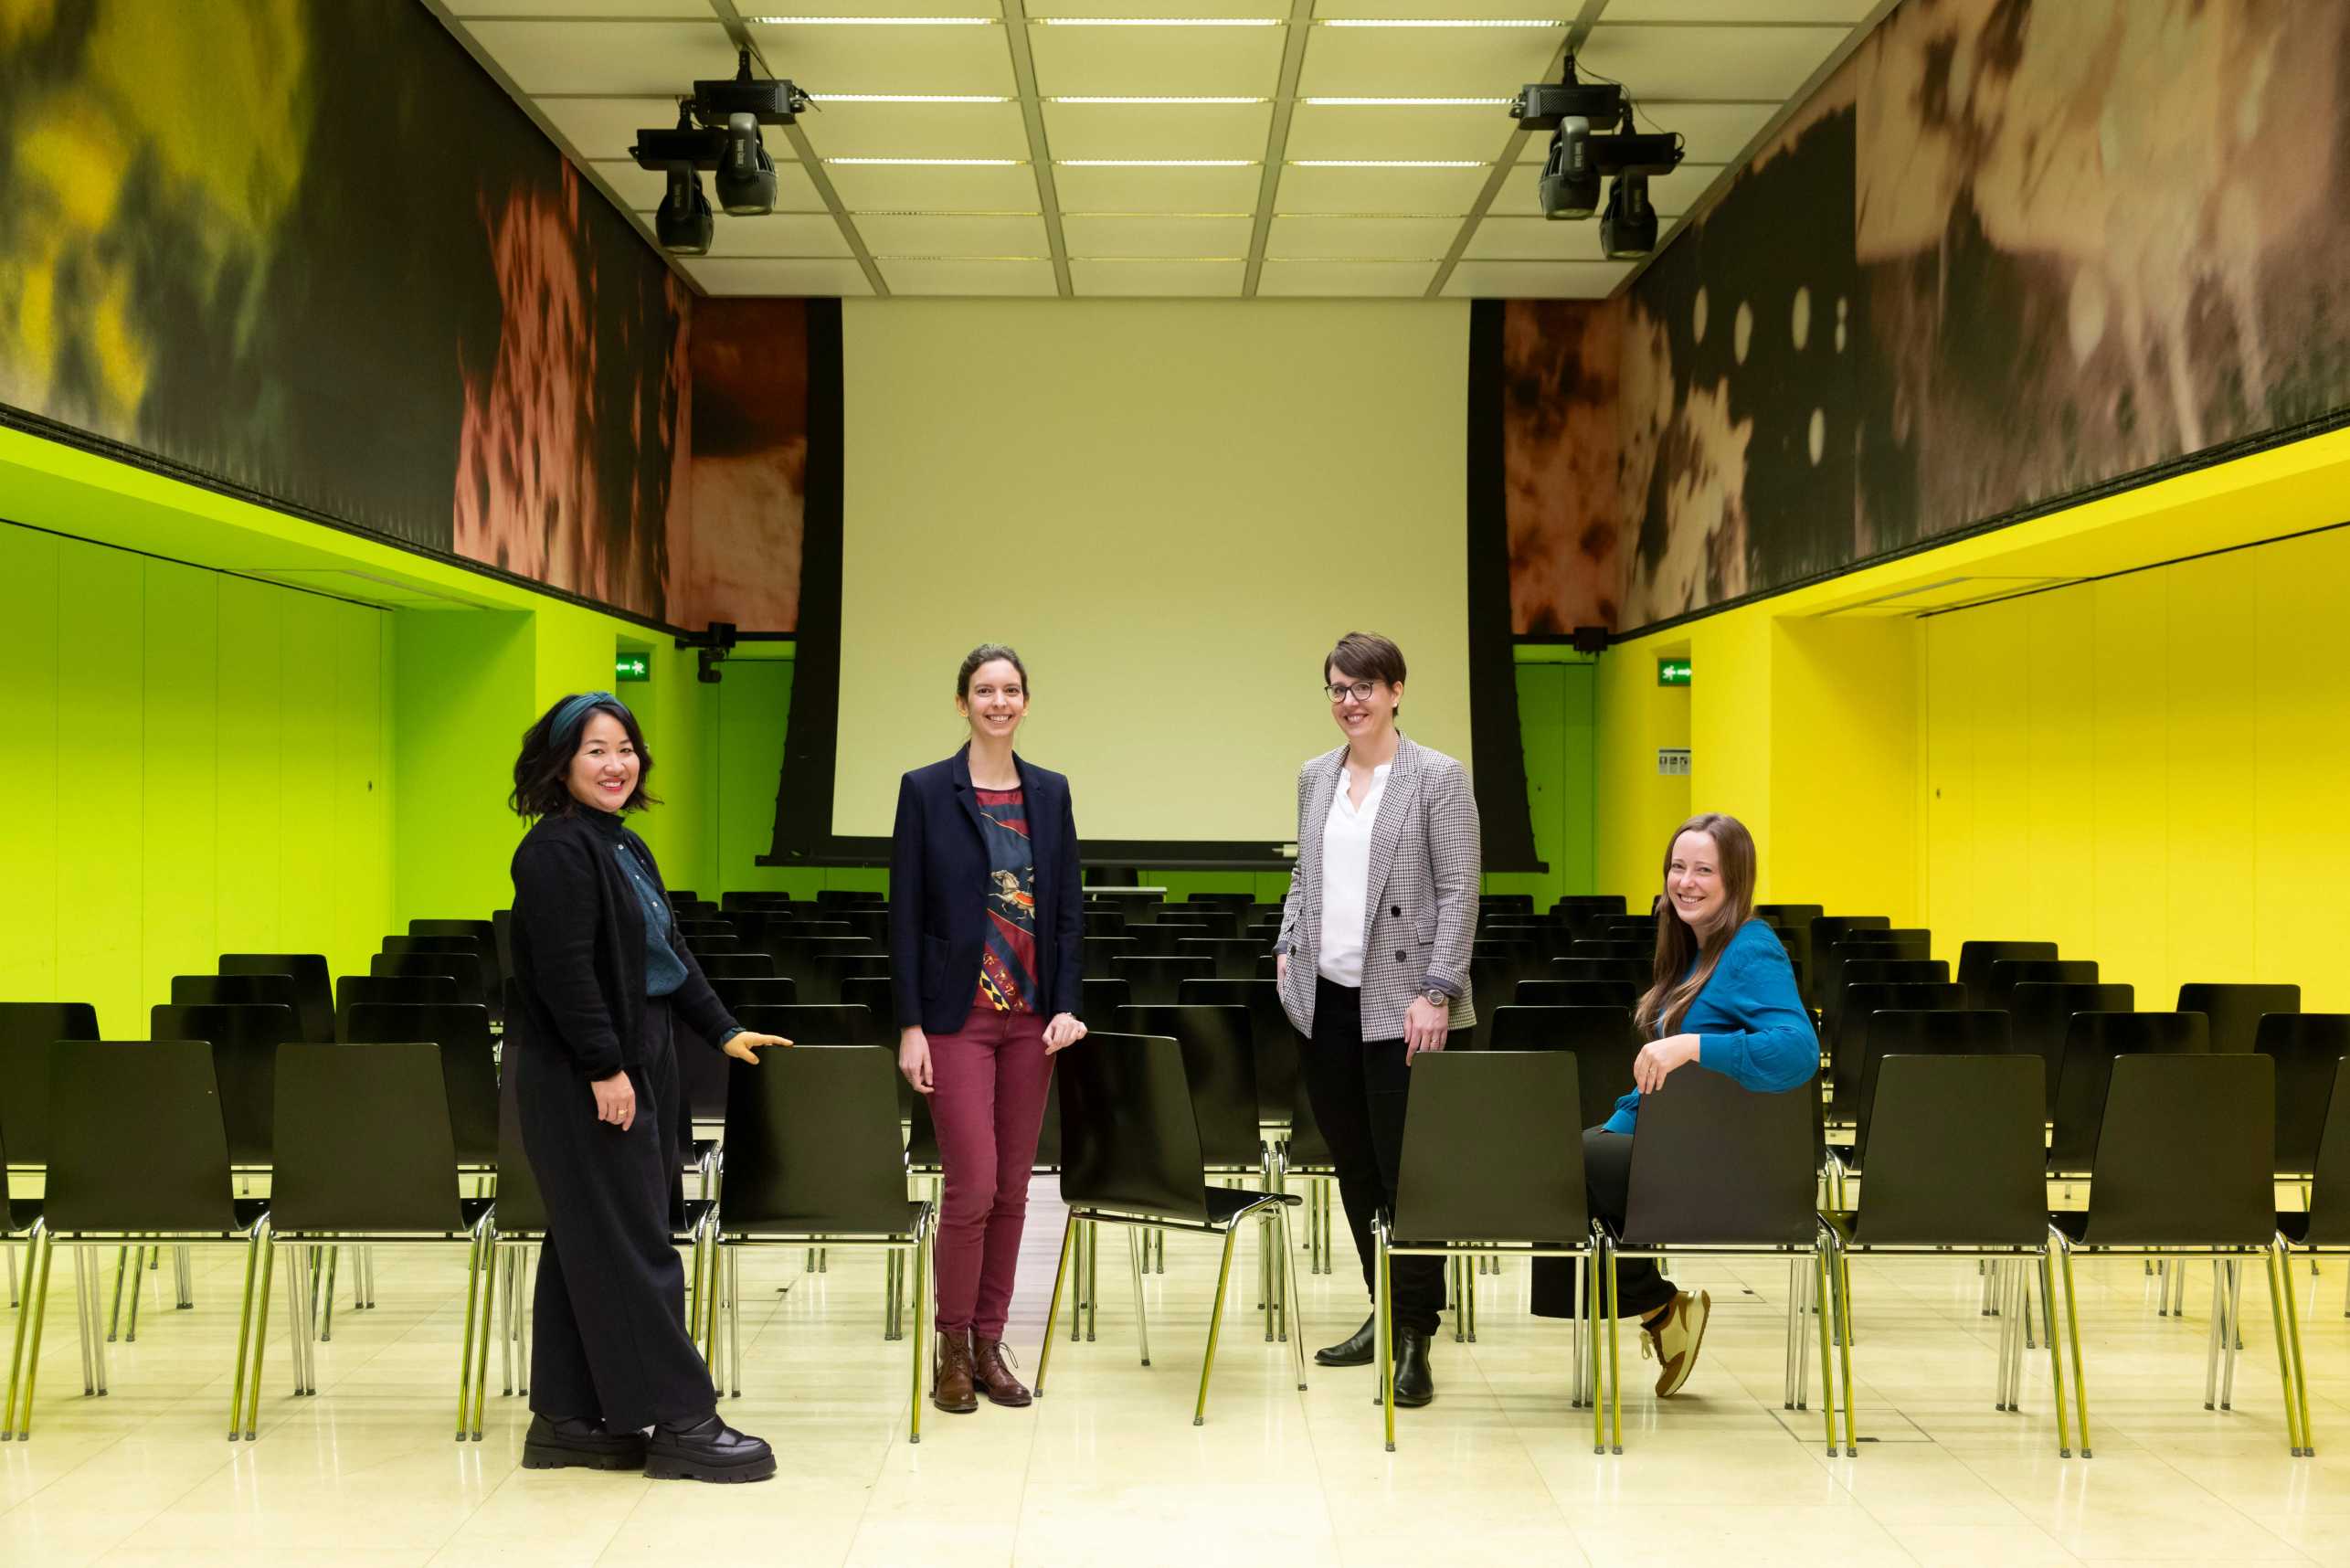 Four people are in a room with green walls and lots of black chairs